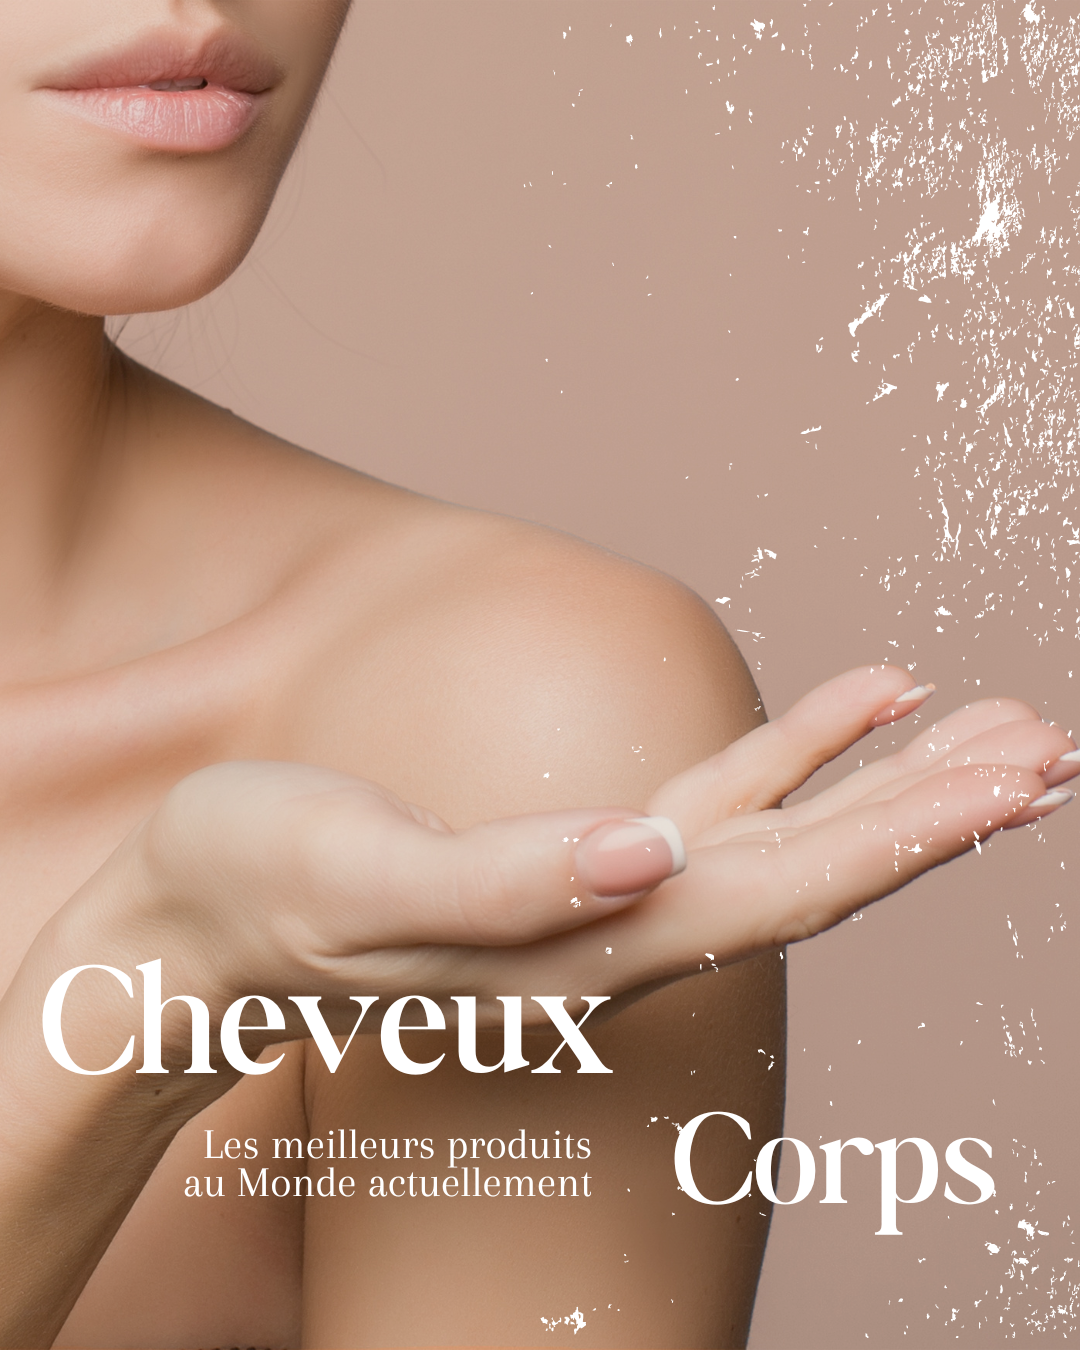 Cheveux & Corps